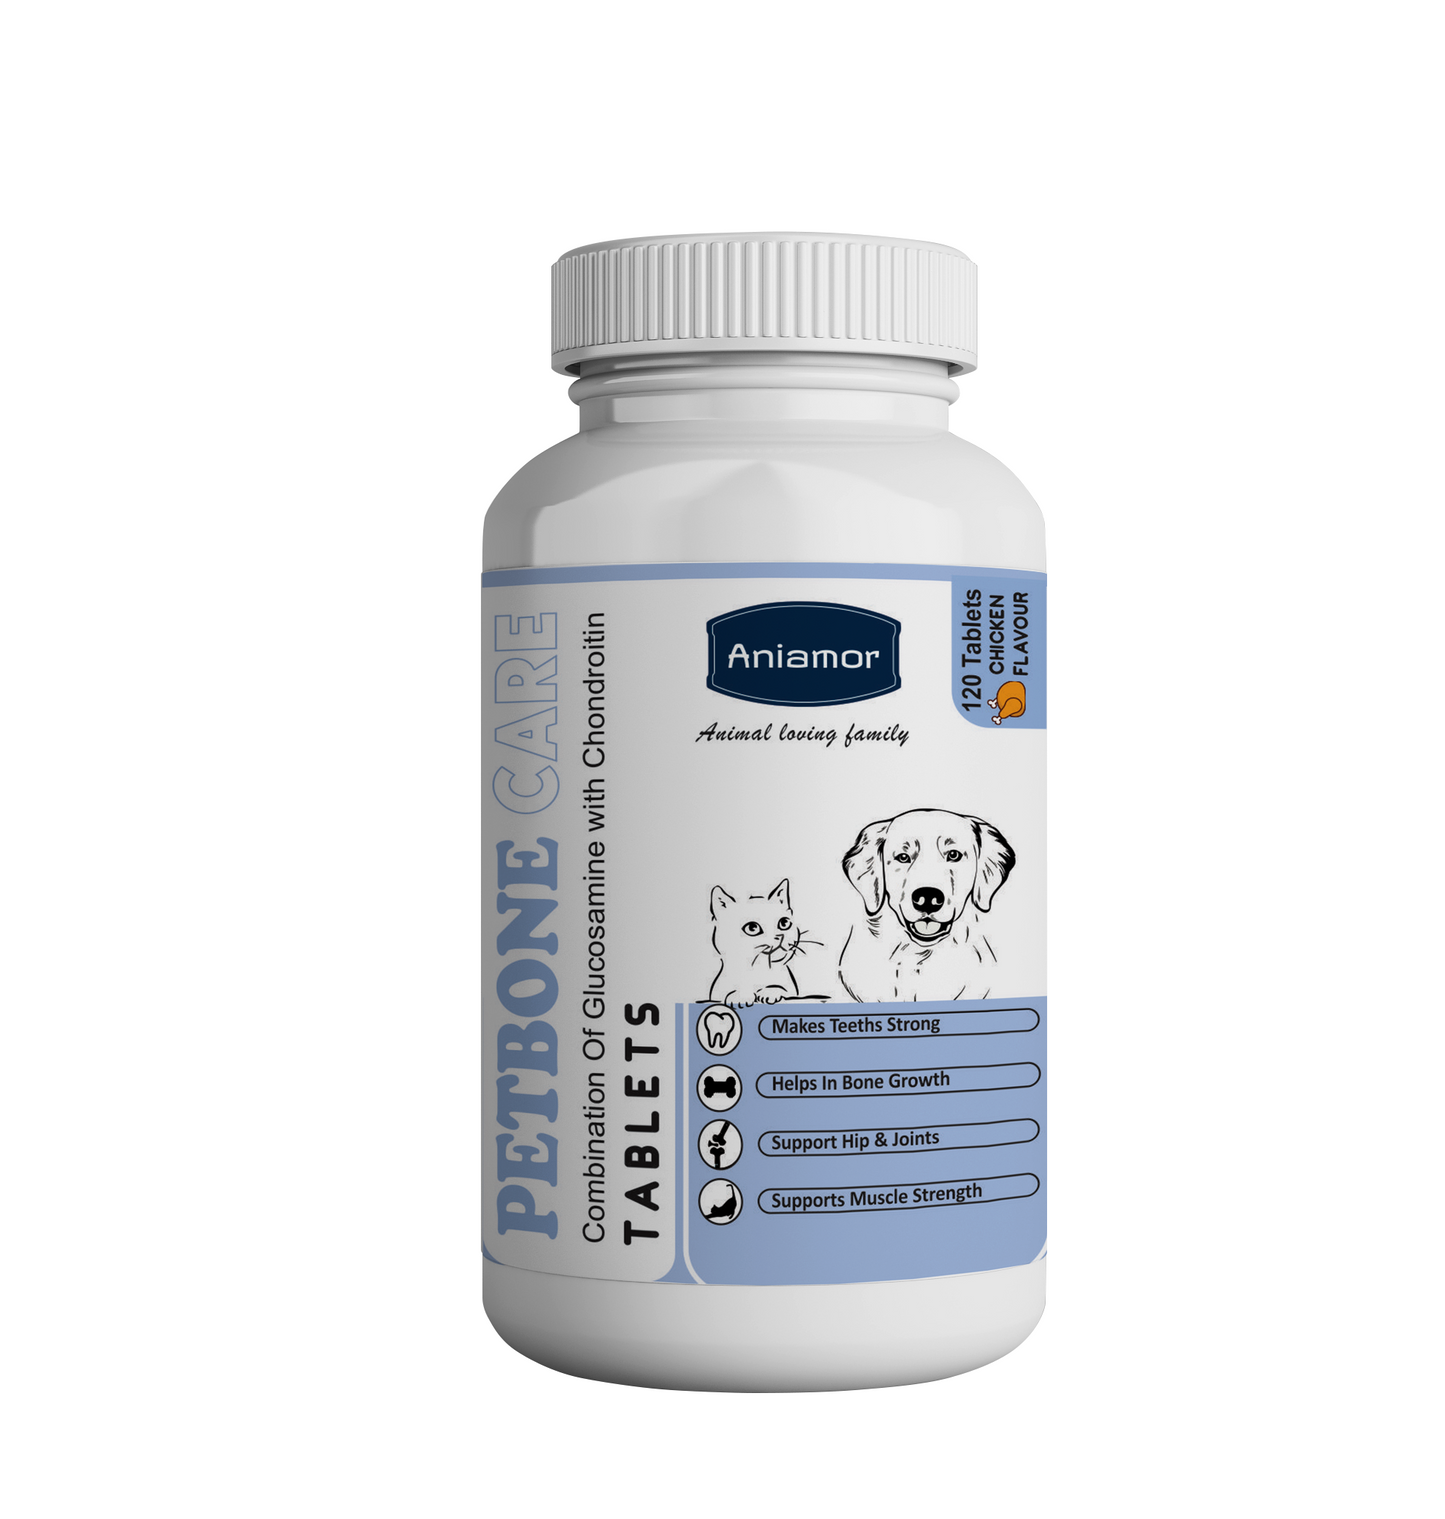 Pet bone tablets for pets-Aniamor| Glucosamine and Chondroitin Tablets| 120 tablets